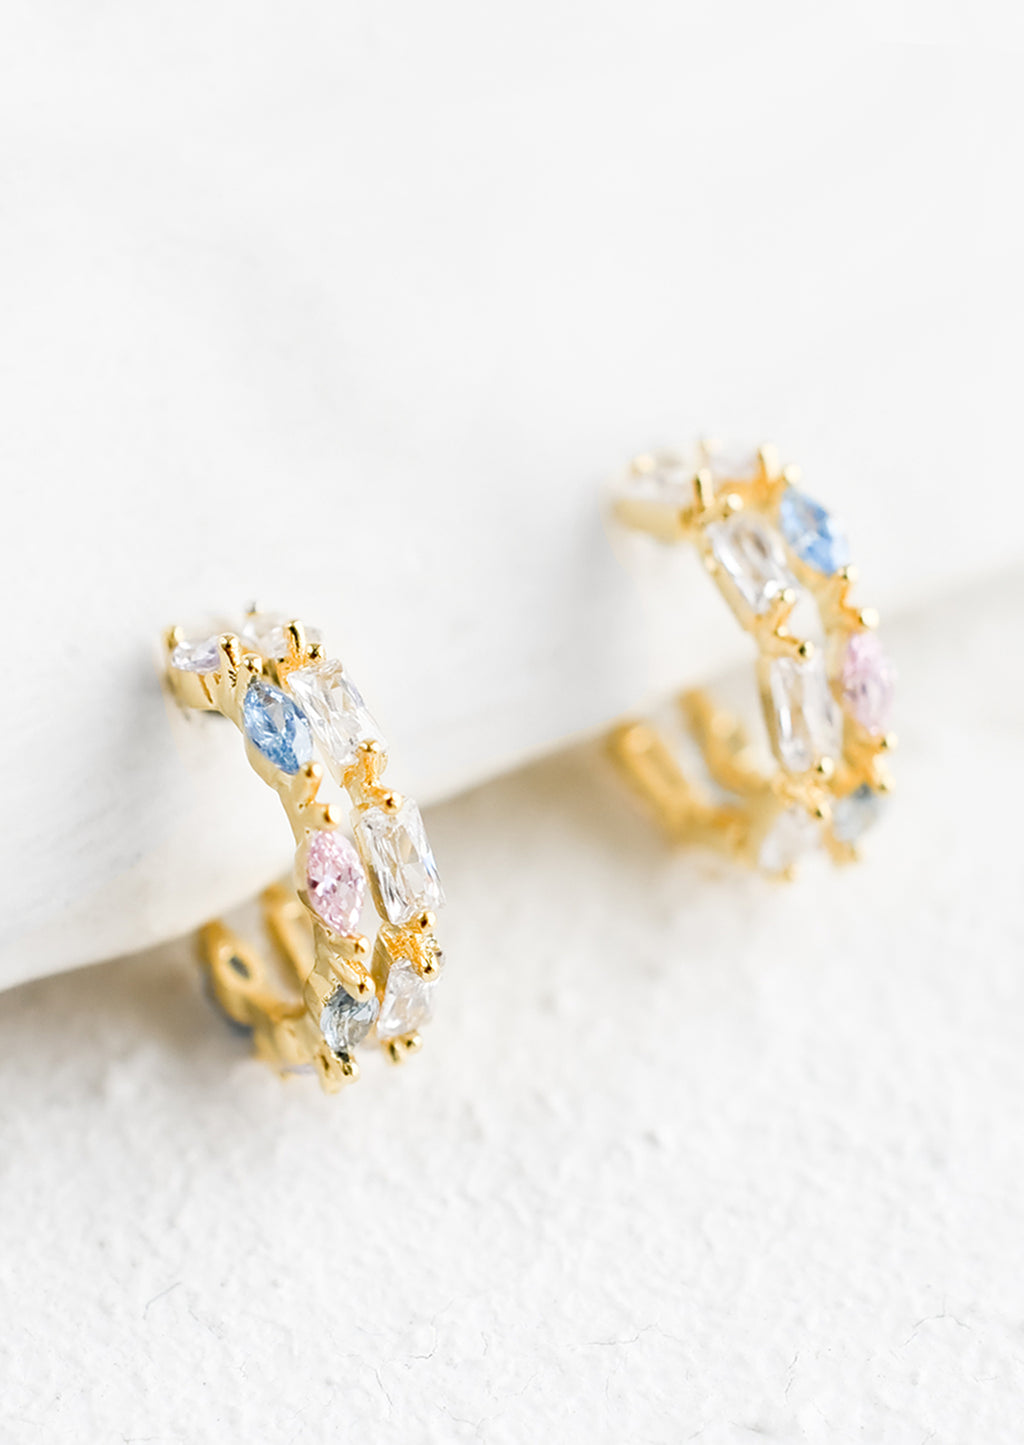 1: A pair of small gold huggie hoop earrings with clear, pink and blue crystals.